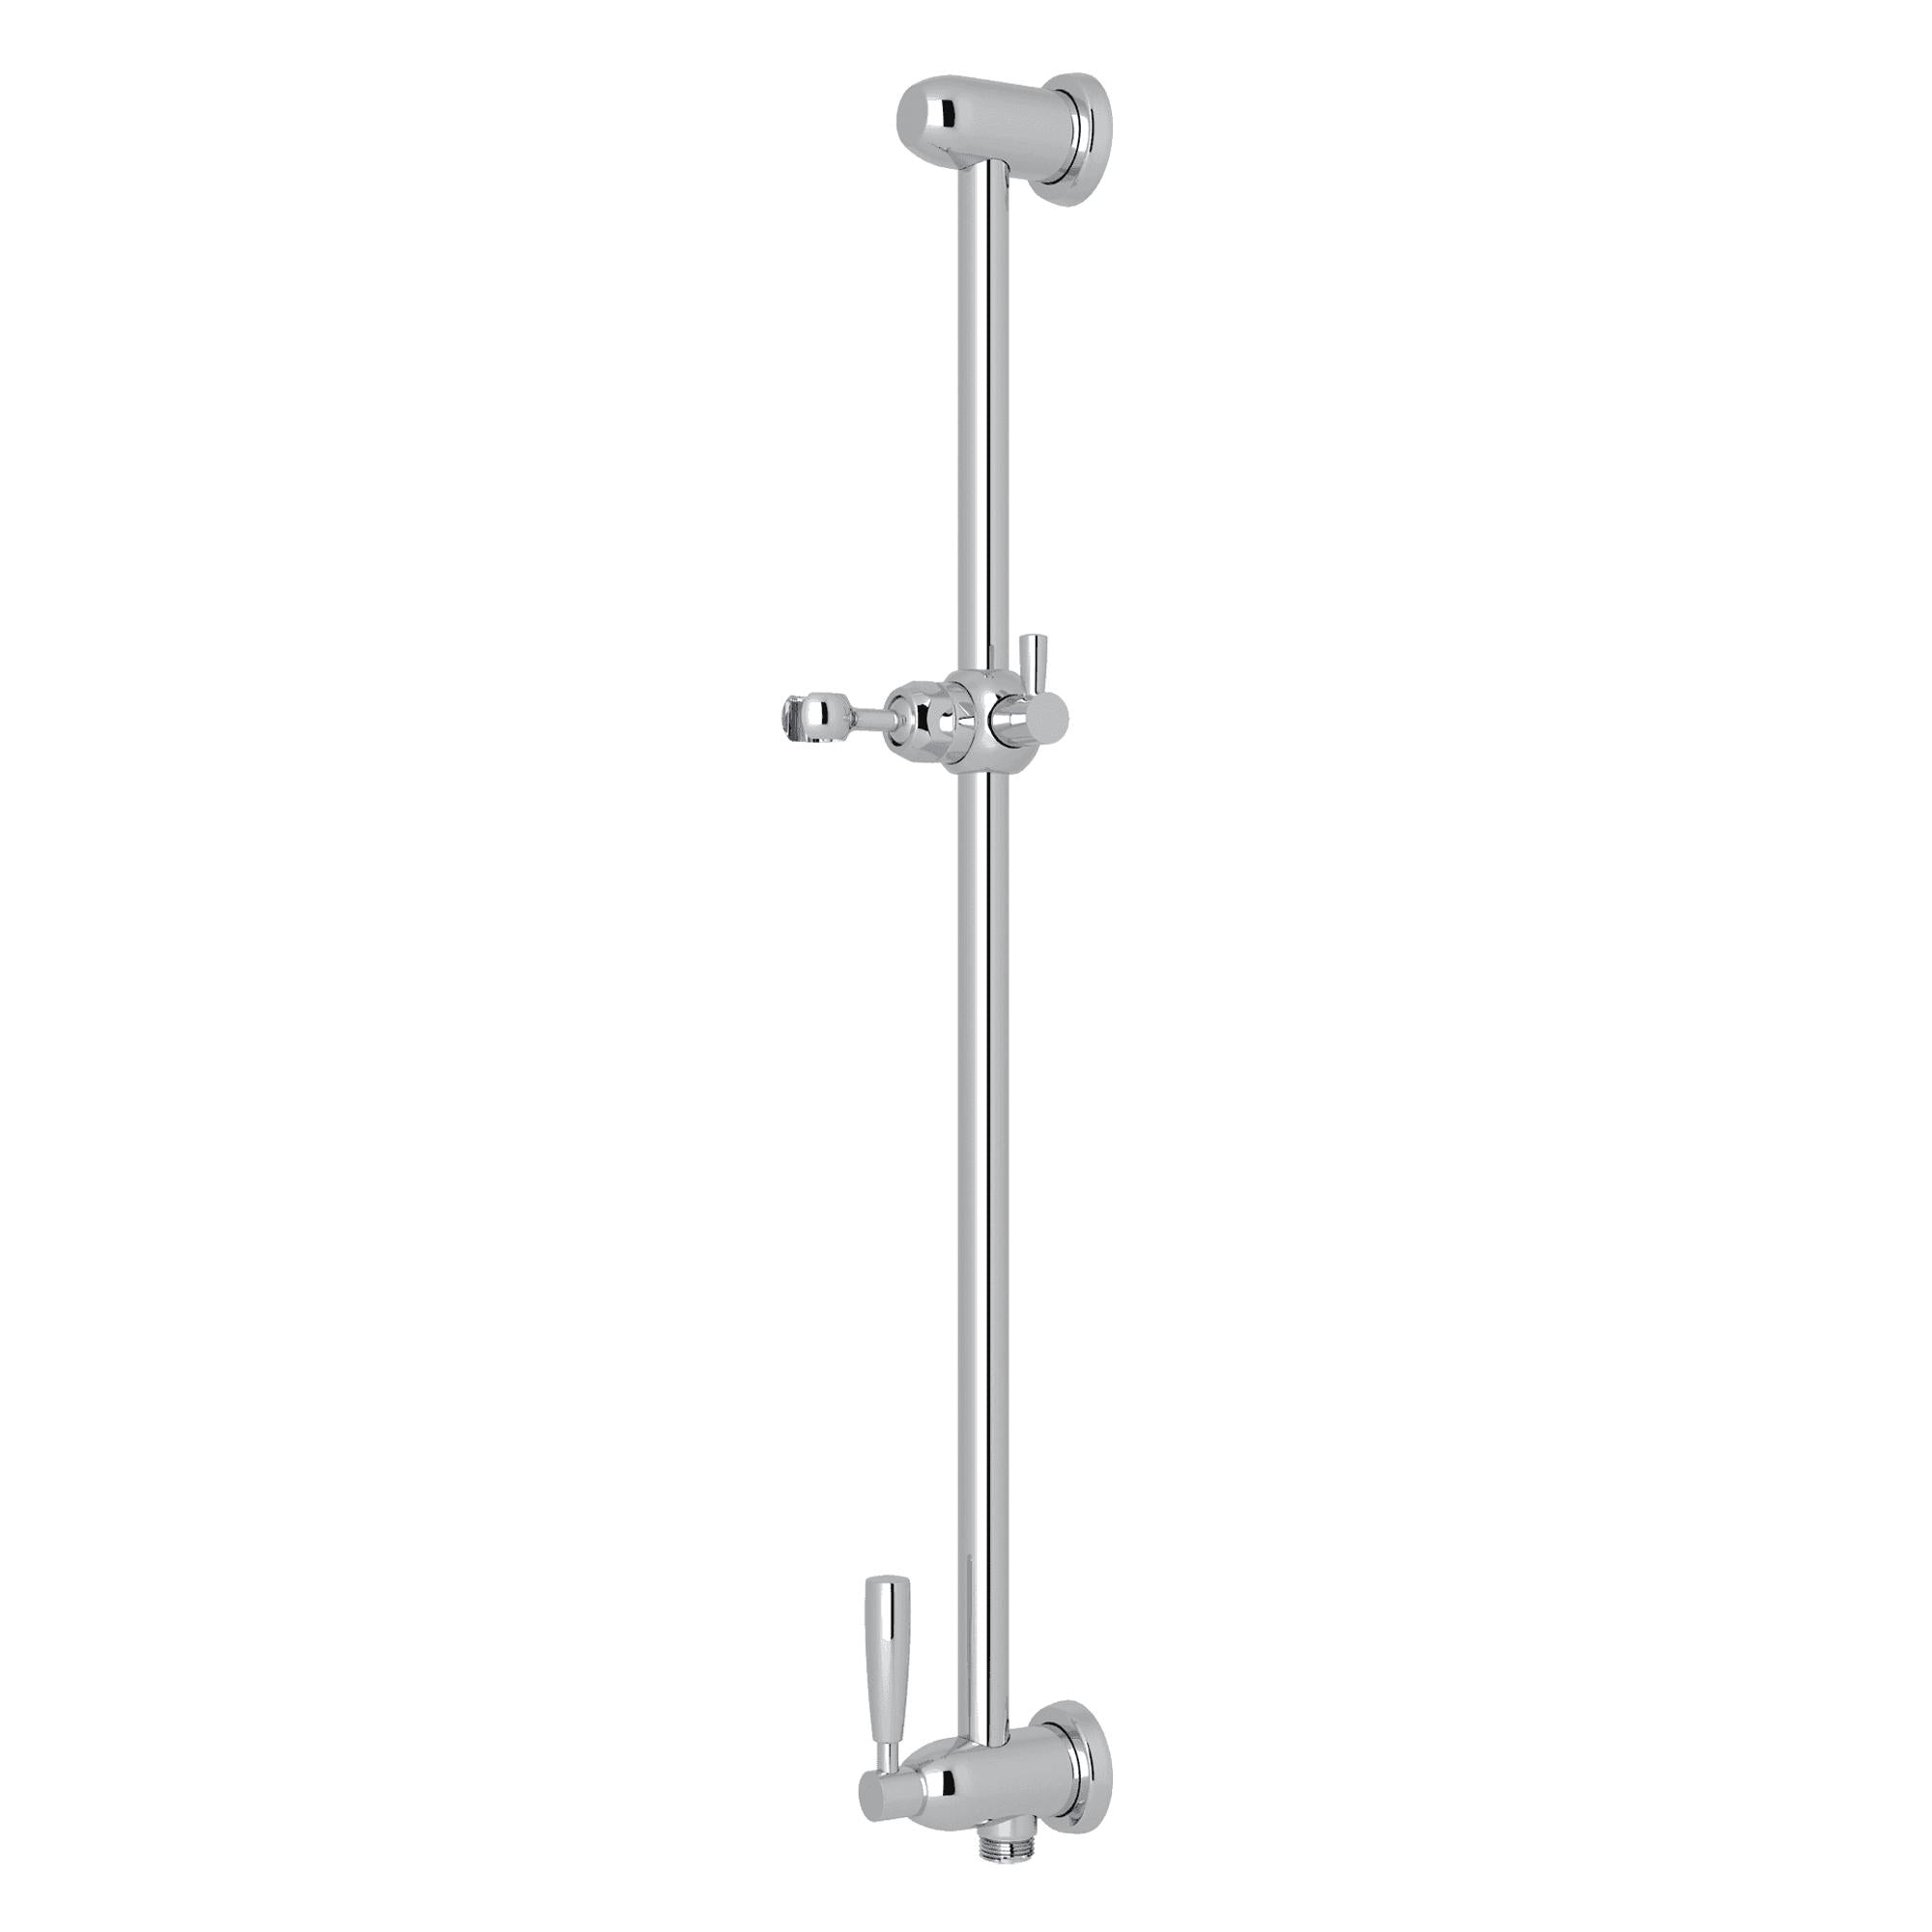 Perrin & Rowe U.5350 24" Slide Bar With Integrated Volume Control And Outlet